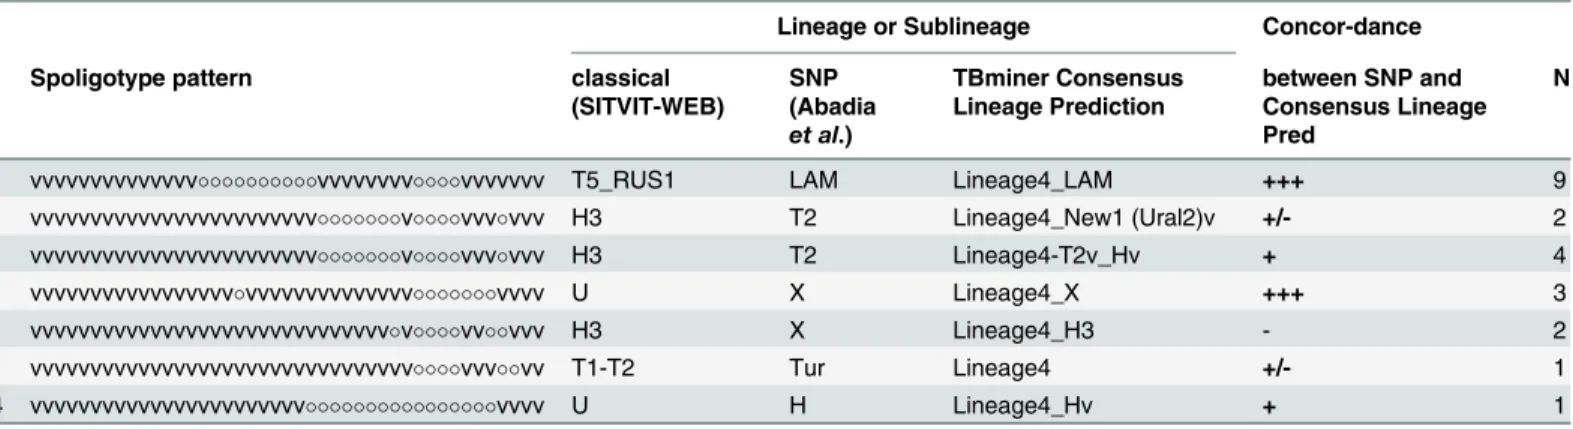 Table 4. Concordance between SNP classification and the newly proposed and automatized consensus tool on a set of isolates with conflicting assignations in existing taxonomies.